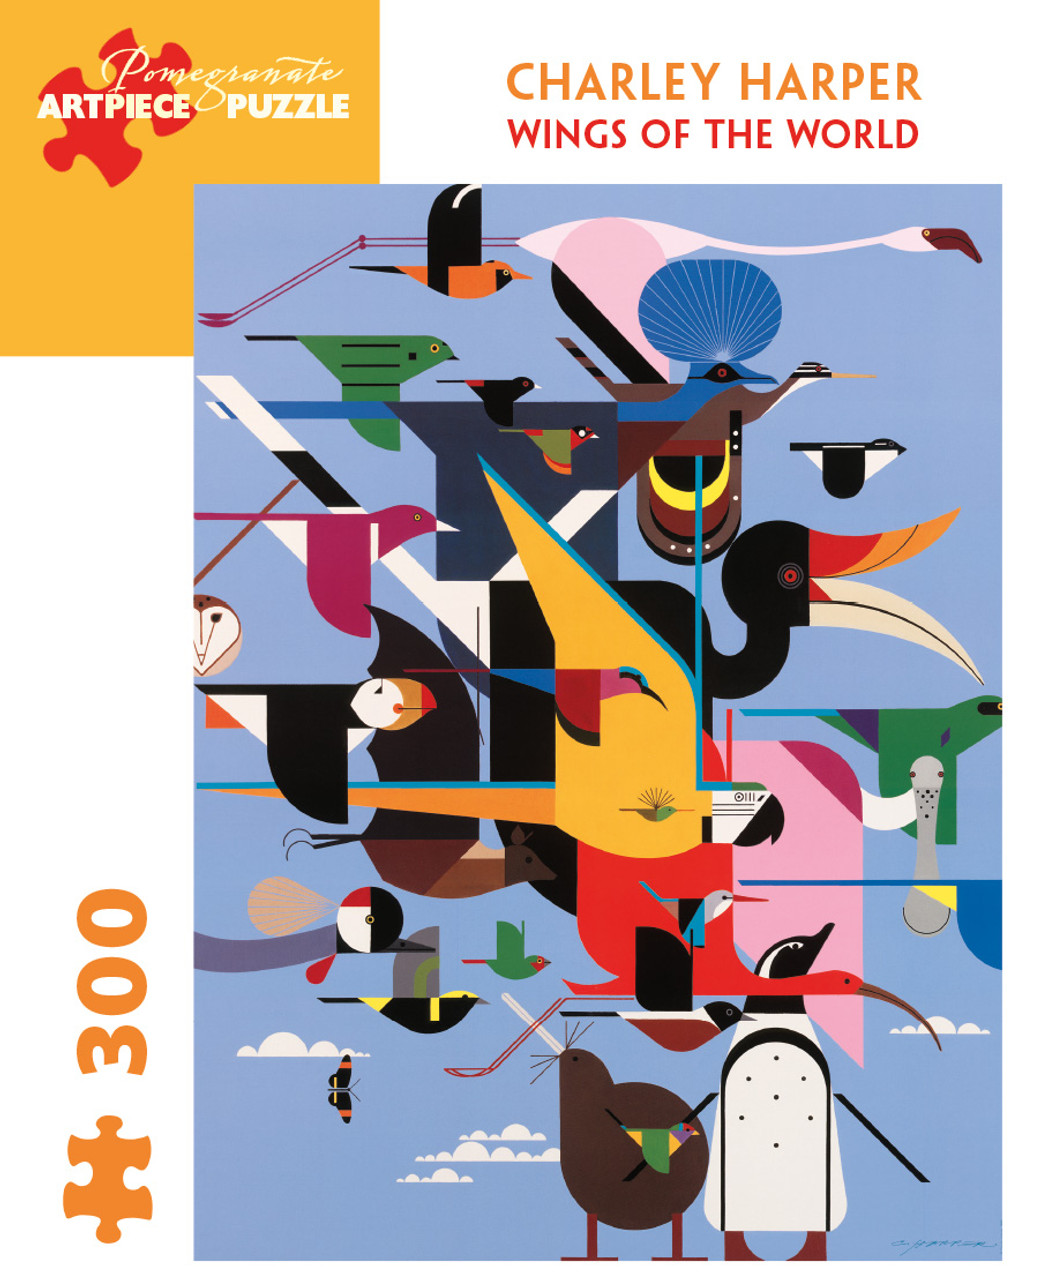 Wings of the World, Charley Harper - 300 pcs